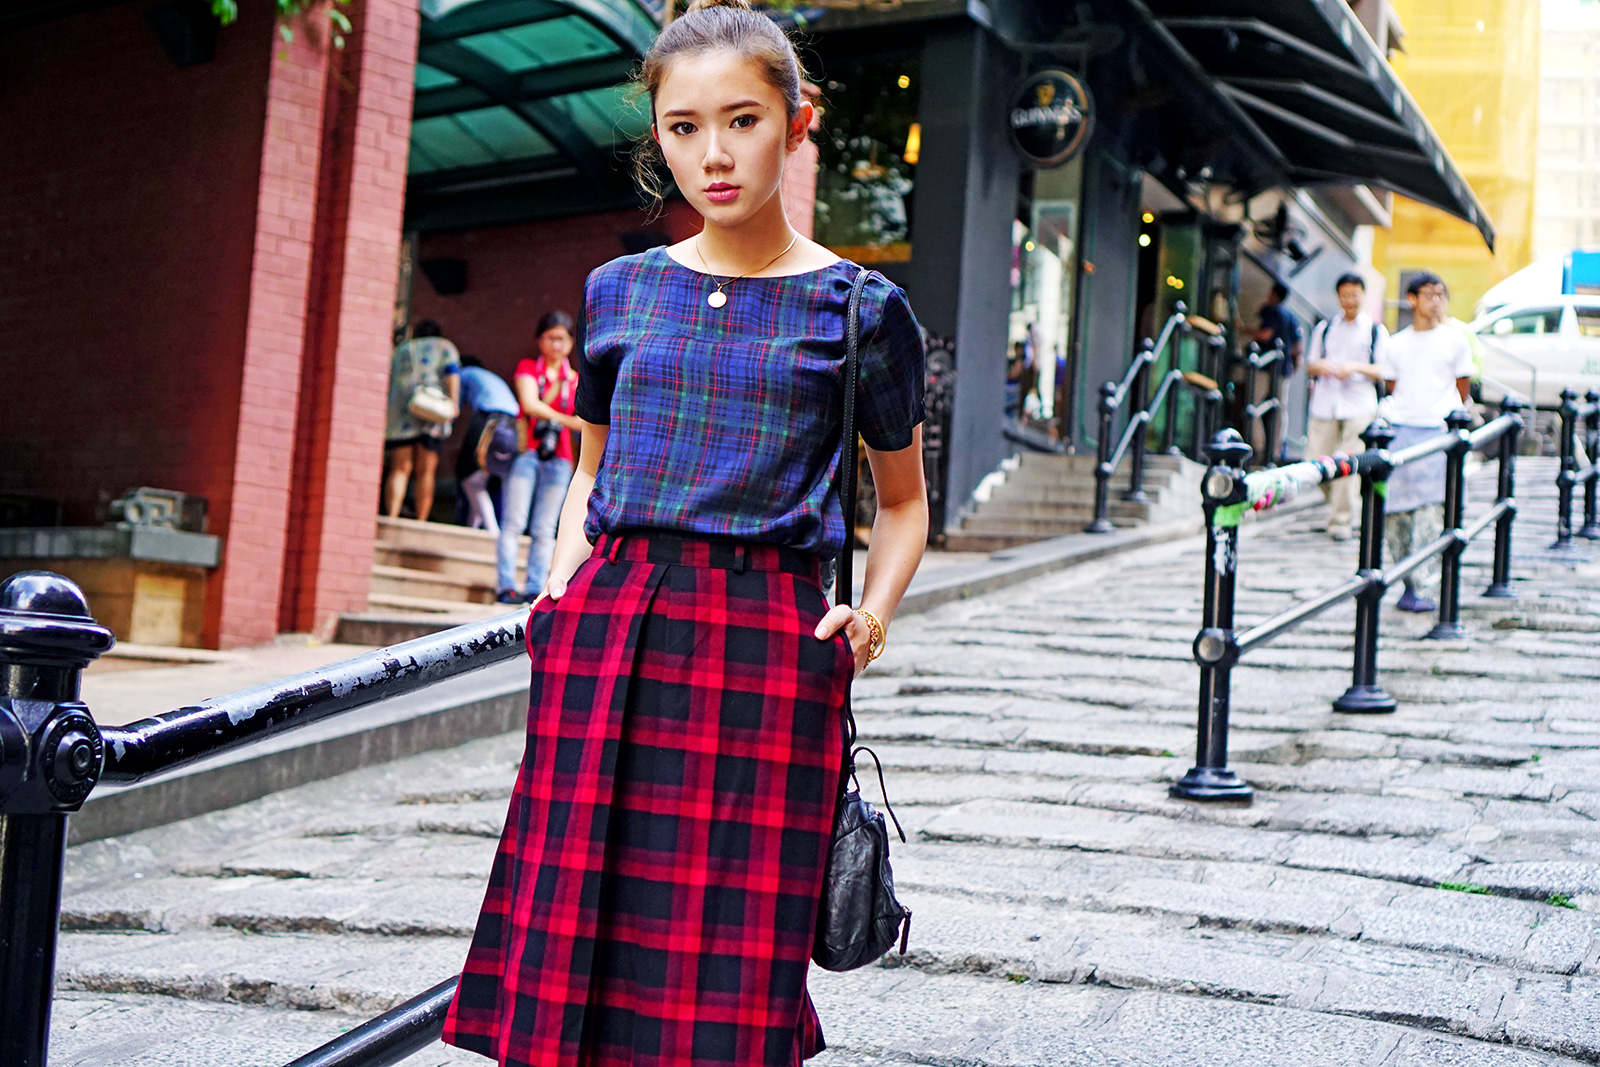 Plaid On Plaid Fashion at Hong Kong By Camille Co